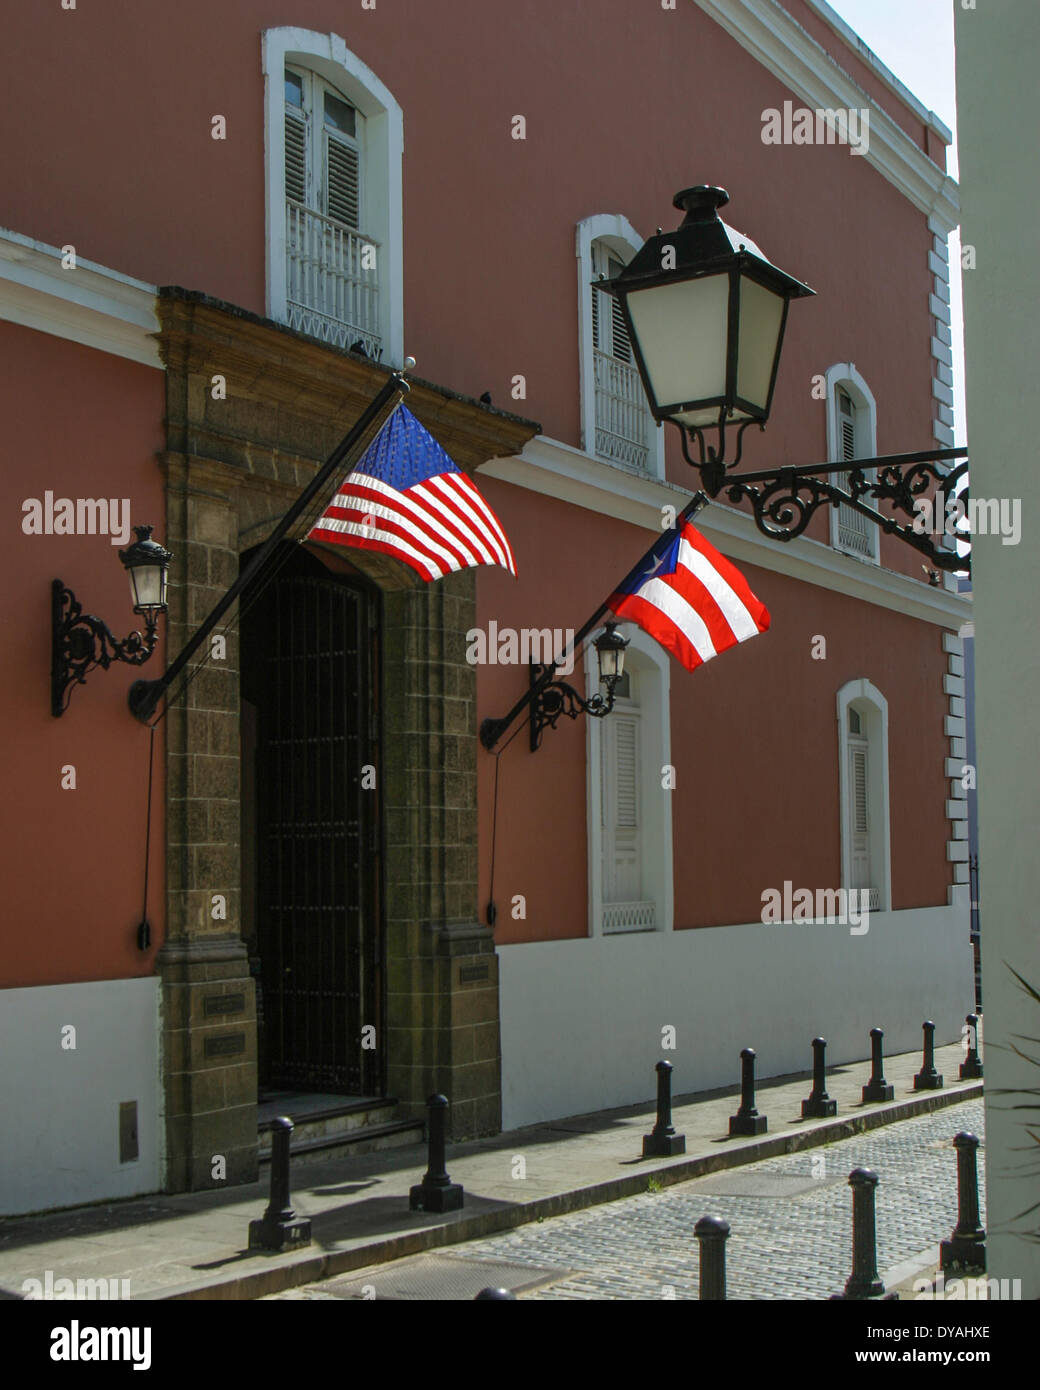 San Juan, Puerto Rico, US. 28th Mar, 2005. Occupying a prominent location in El Viejo San Juan (Old San Juan) the Palacio Rojo, or Red Palace, is also known as the Sala de Armas del Palacio de Santa Catalina. Constructed in 1792, the two-story baroque building housed auxiliary services for the defense of the city and served as living quarters for the Spanish post commanding officers. © Arnold Drapkin/ZUMAPRESS.com/Alamy Live News Stock Photo